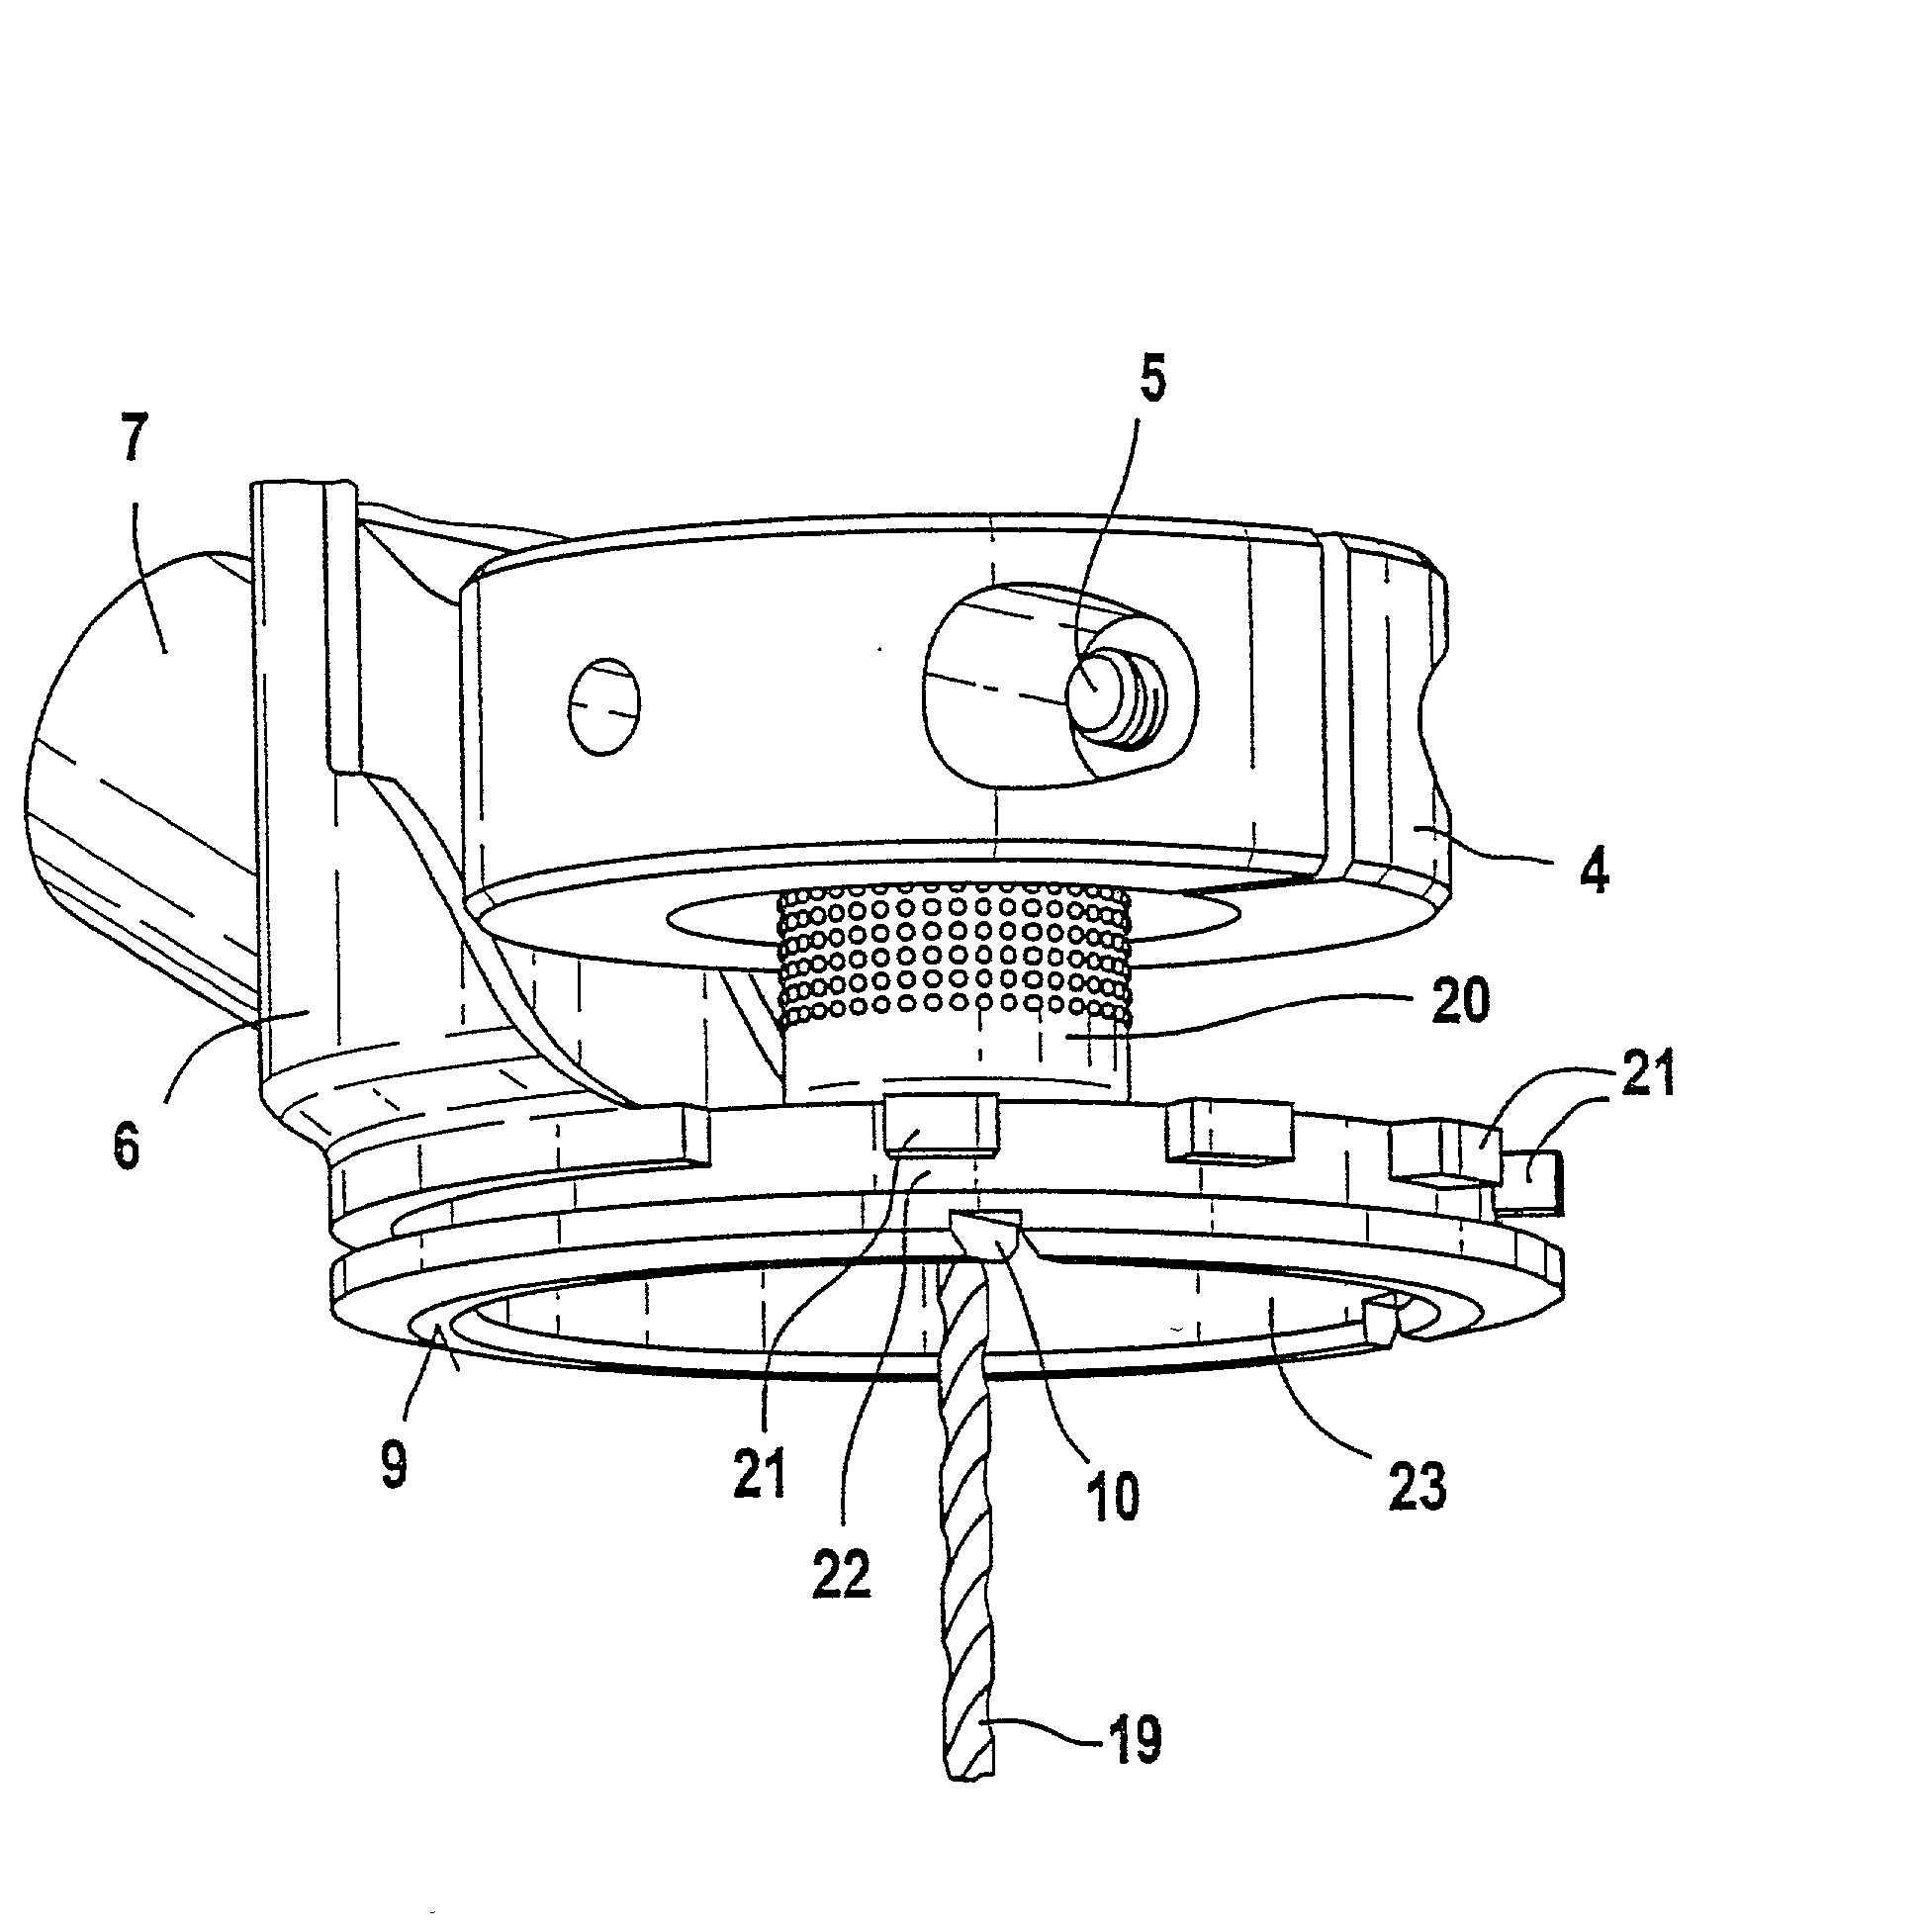 Electric tool comprising a universal mounting for tool attachments